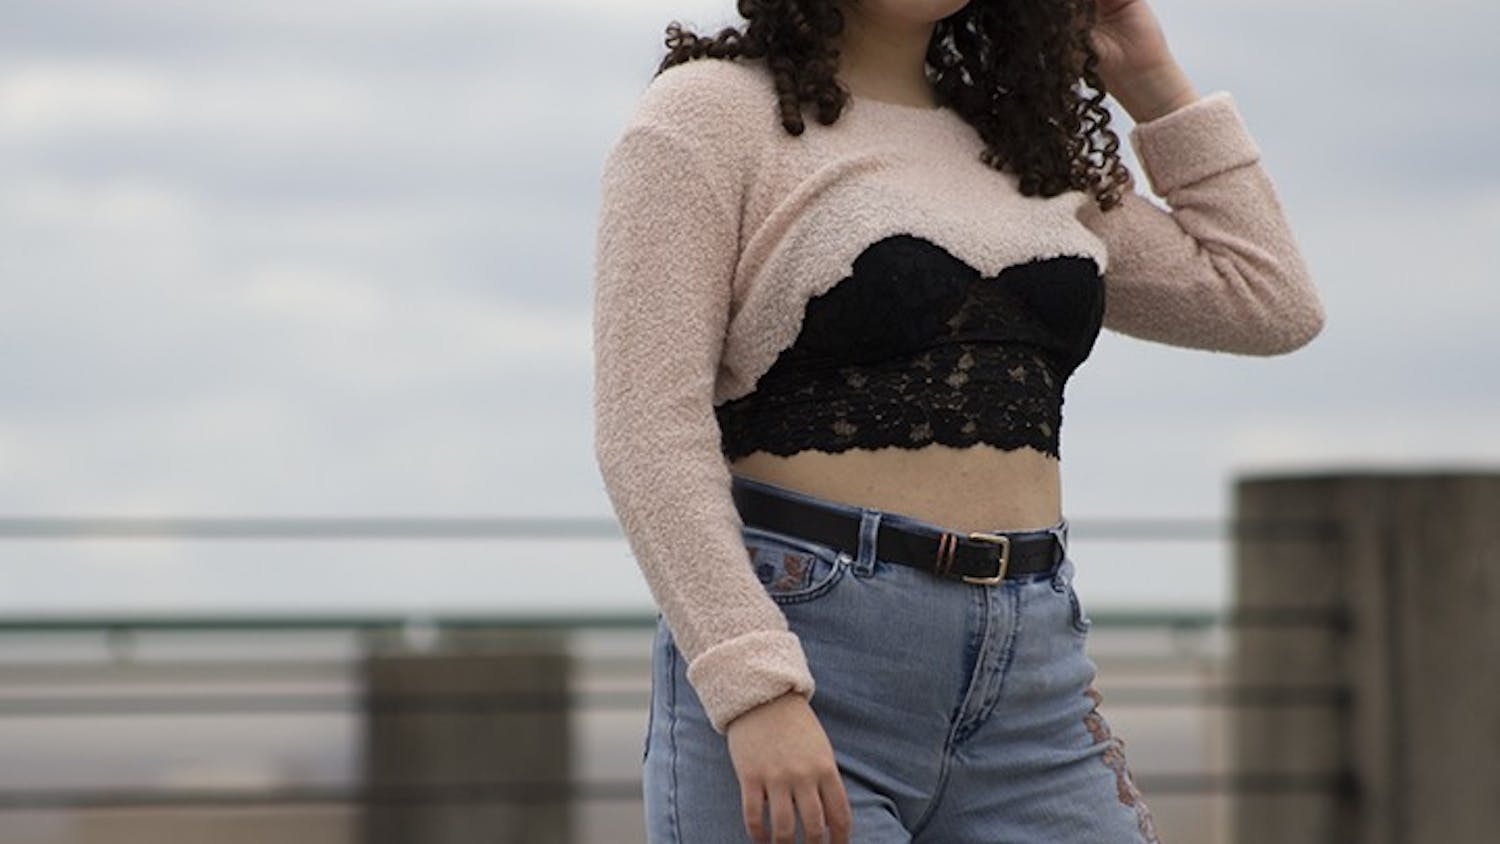  Wearing lace bralettes became a popular trend within the last four years and can be styled in a variety of ways, one being under thrifted sweaters with baggy pants and a belt.
